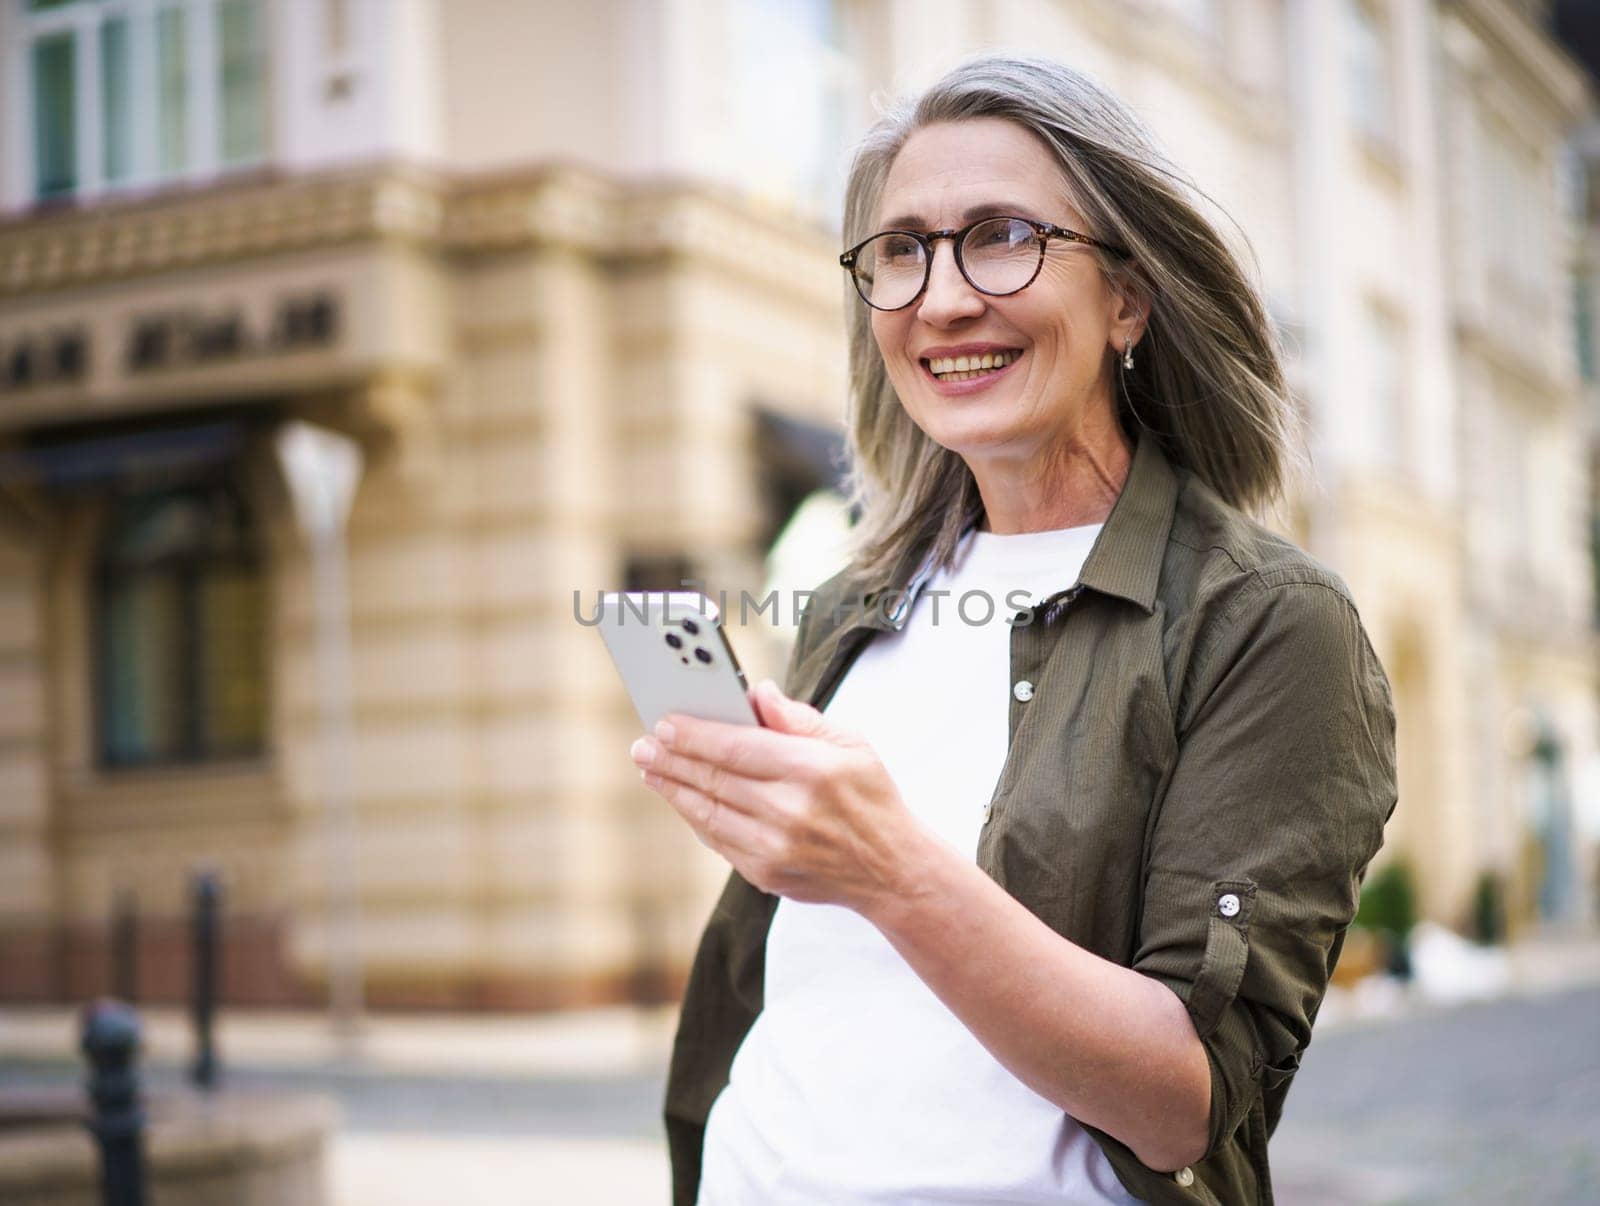 Joyful senior woman with grey hair and mobile phone in hand, enjoying her time in beautiful European city. Image showcases active and modern urban lifestyle of the elderly generation. High quality photo